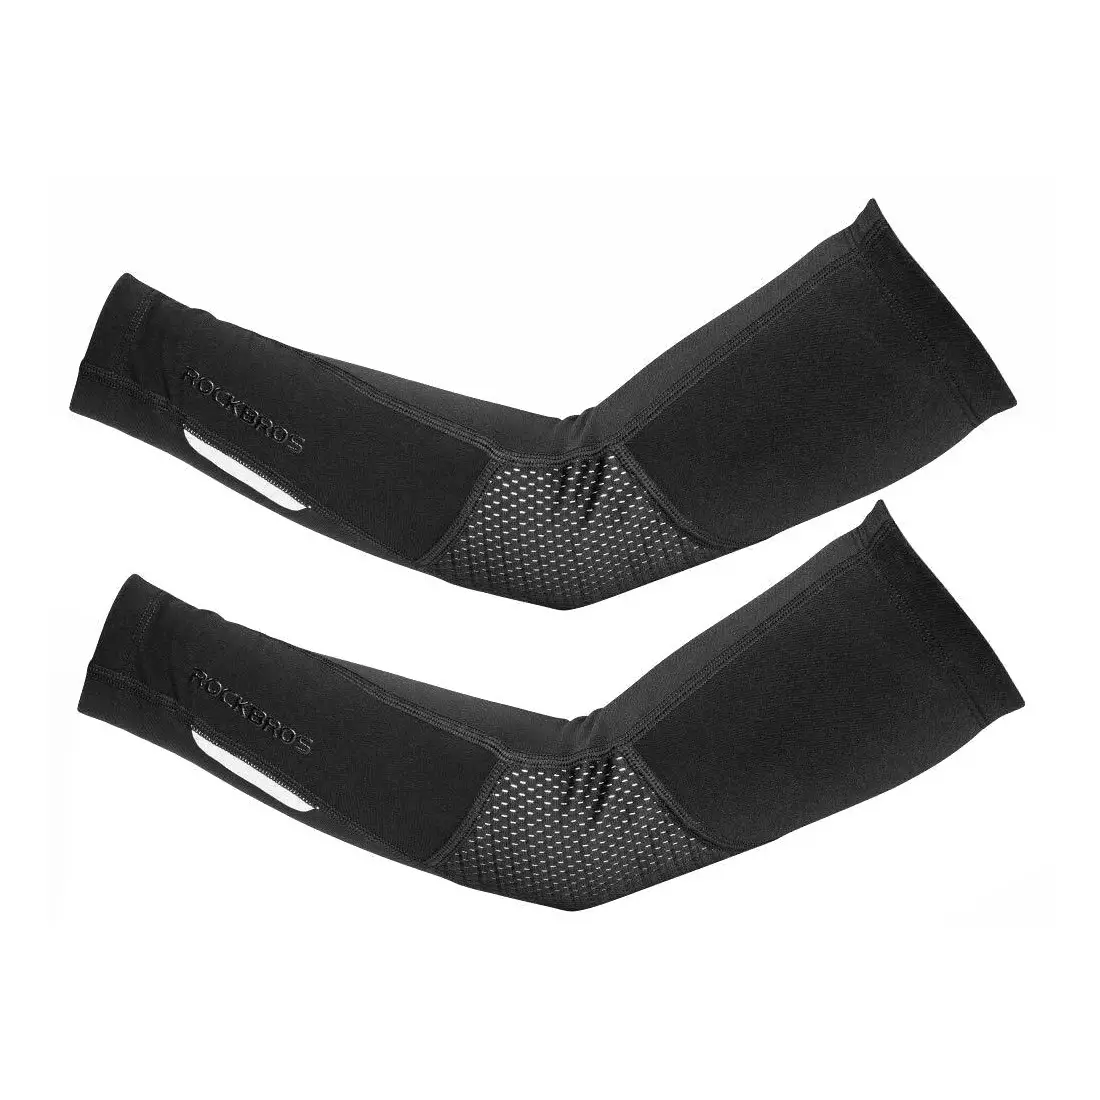 Rockbros insulated bicycle sleeves with membrane, black XT019BK